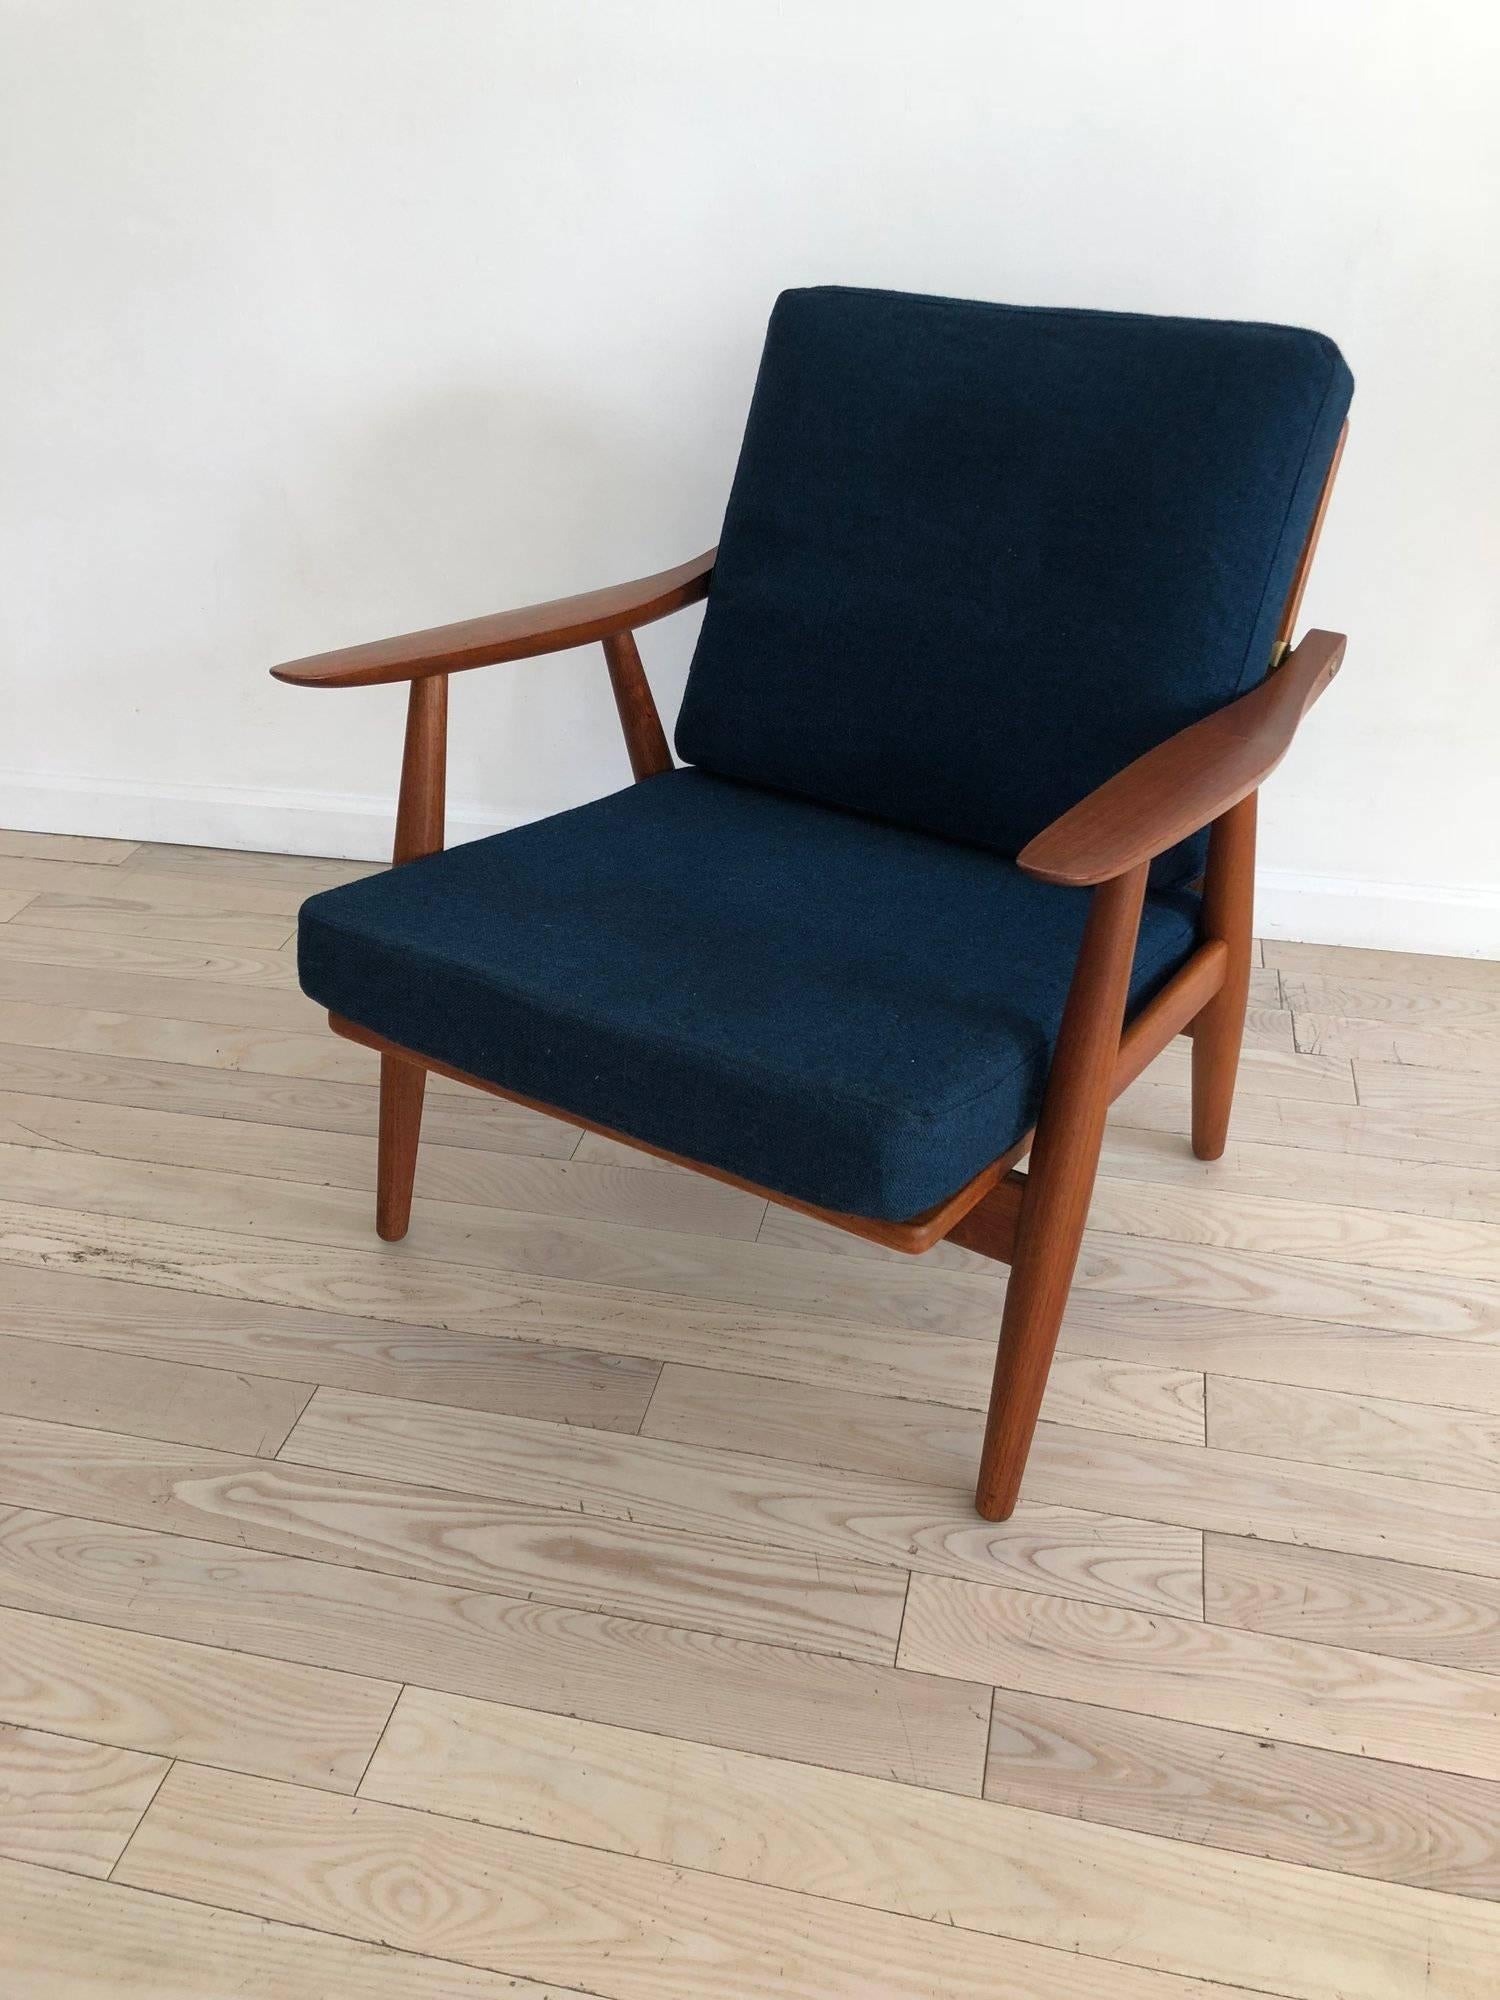 Hans Wegner style GE-270 teak armchair, made in 1956 in Denmark produced by GETAMA, Gedsted Denmark. Teak frame with exposed brass fittings. New memory foam cushion with original wool covers. Iconic and authentic Hans J Werner. Labelled and all